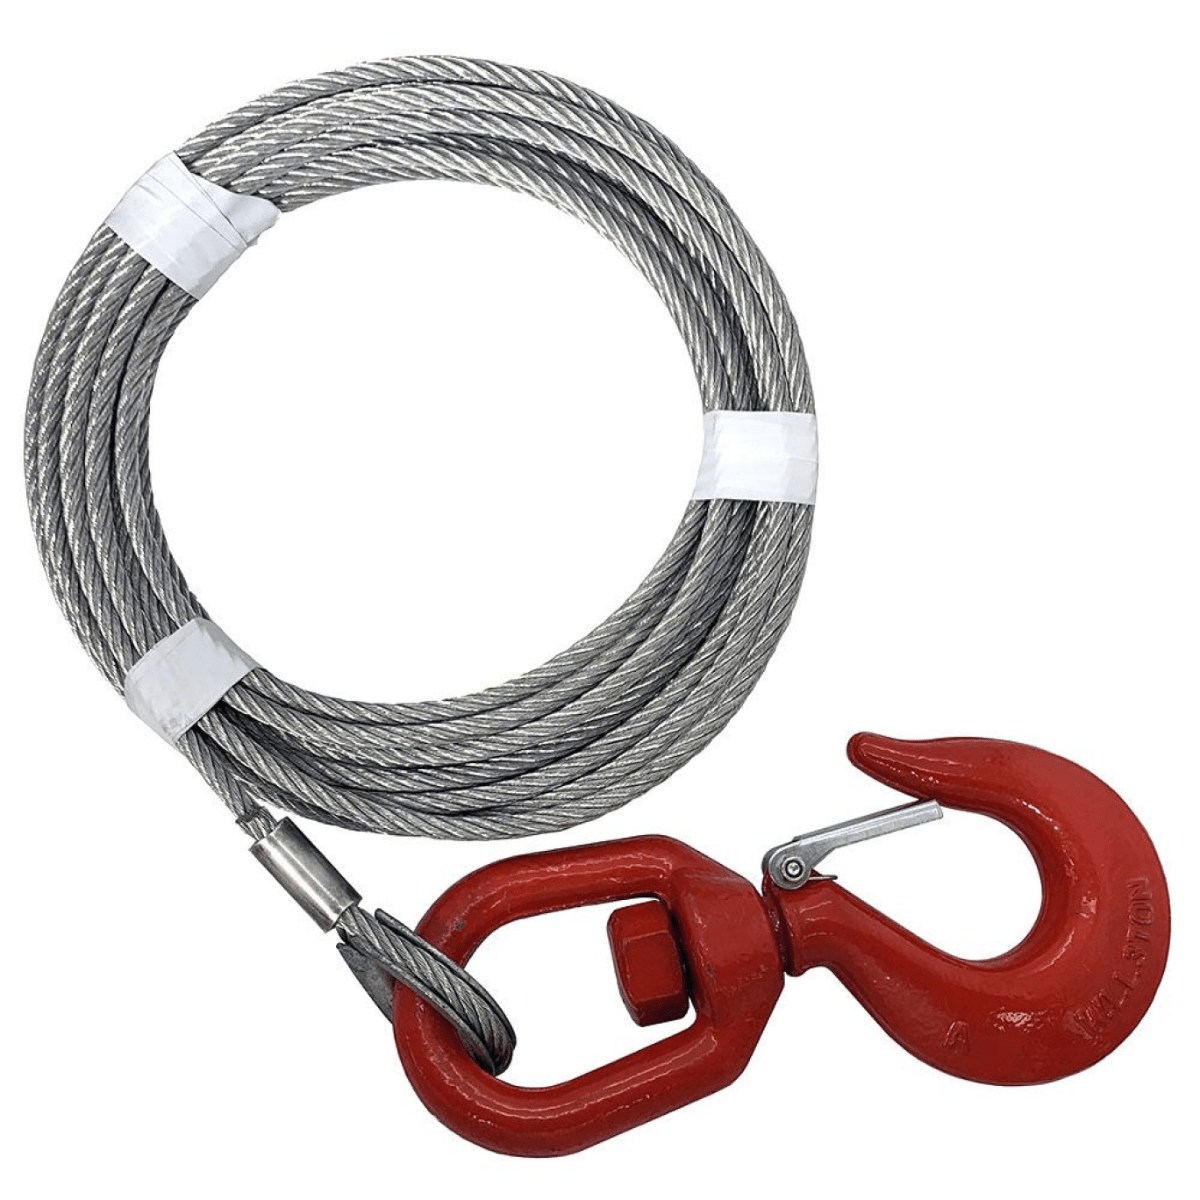 https://icbrindle.com/media/catalog/product/cache/6bbb8cd0d1cbc640265b606c71457640/g/a/galvanised_steel_wire_rope_recovery_winch_cable_with_hook.png